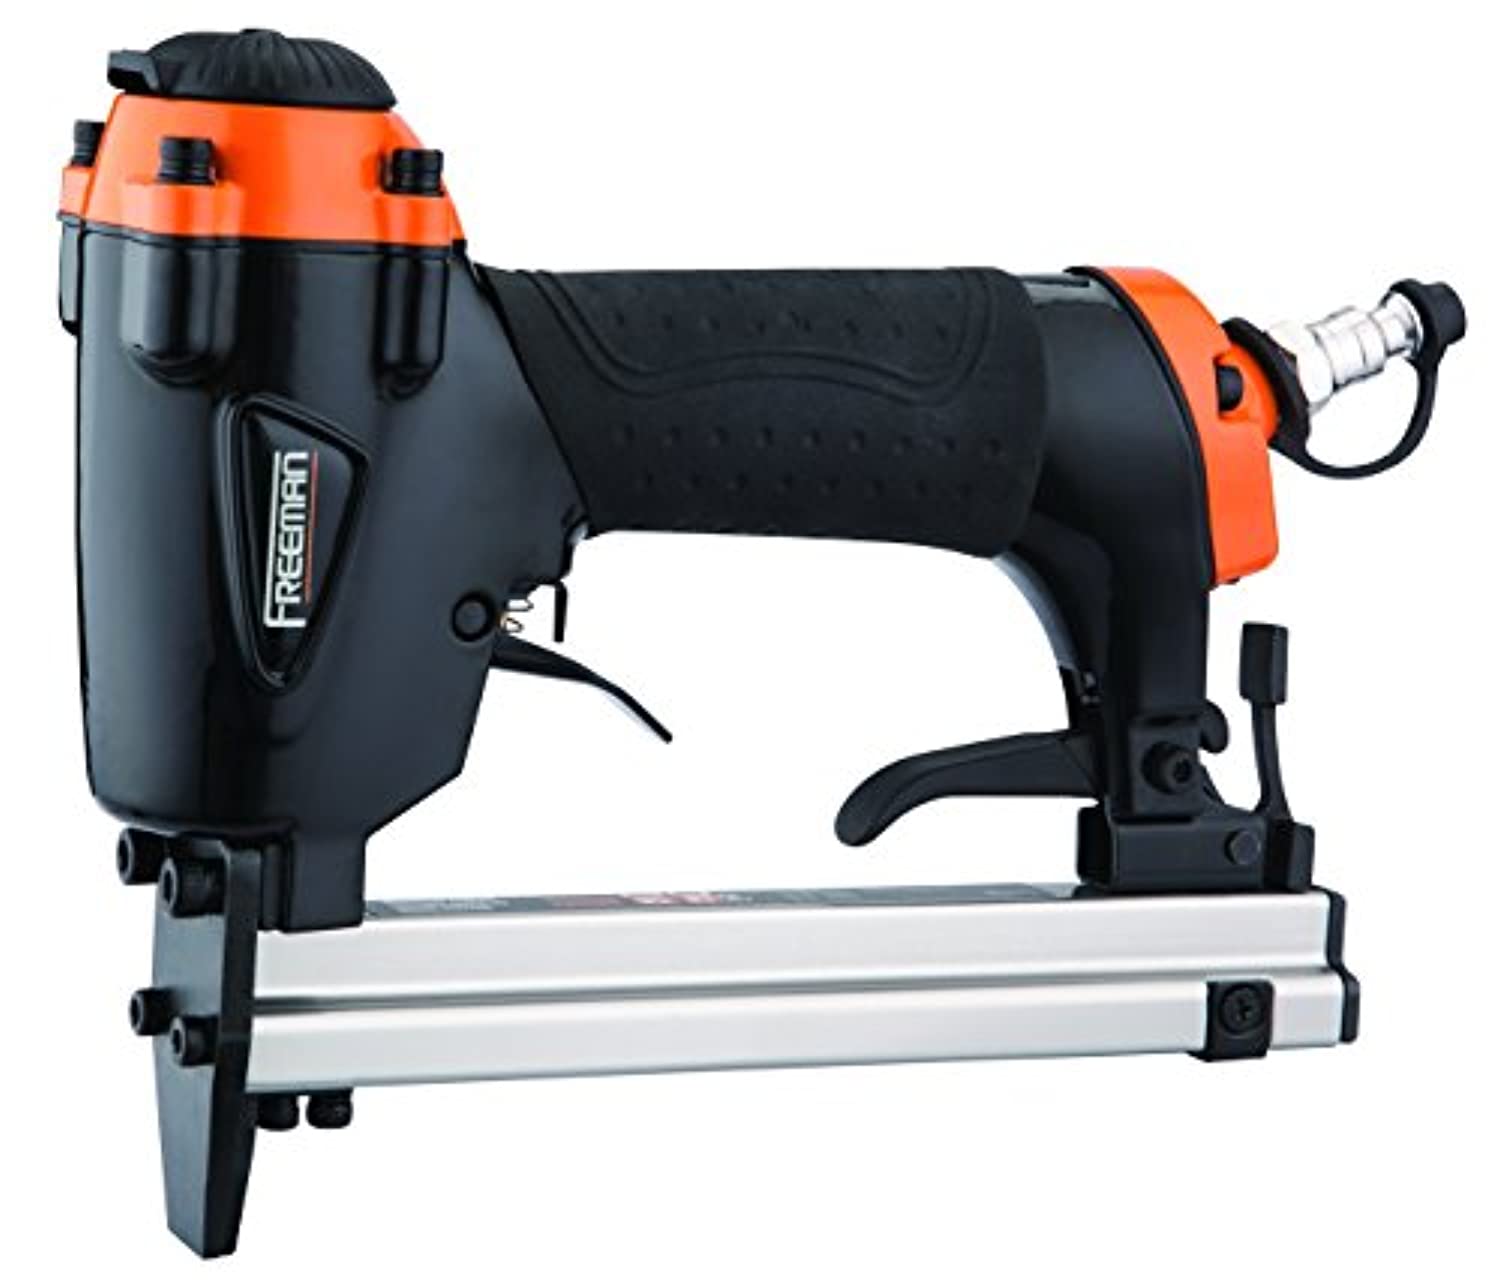 Freeman P2238US Pneumatic 22-Gauge 5/8" Upholstery Stapler Ergonomic and Lightweight Nail Gun with Extension Nose and Safety Trigger for Upholstery, Cabinets, Fabric, and Screens